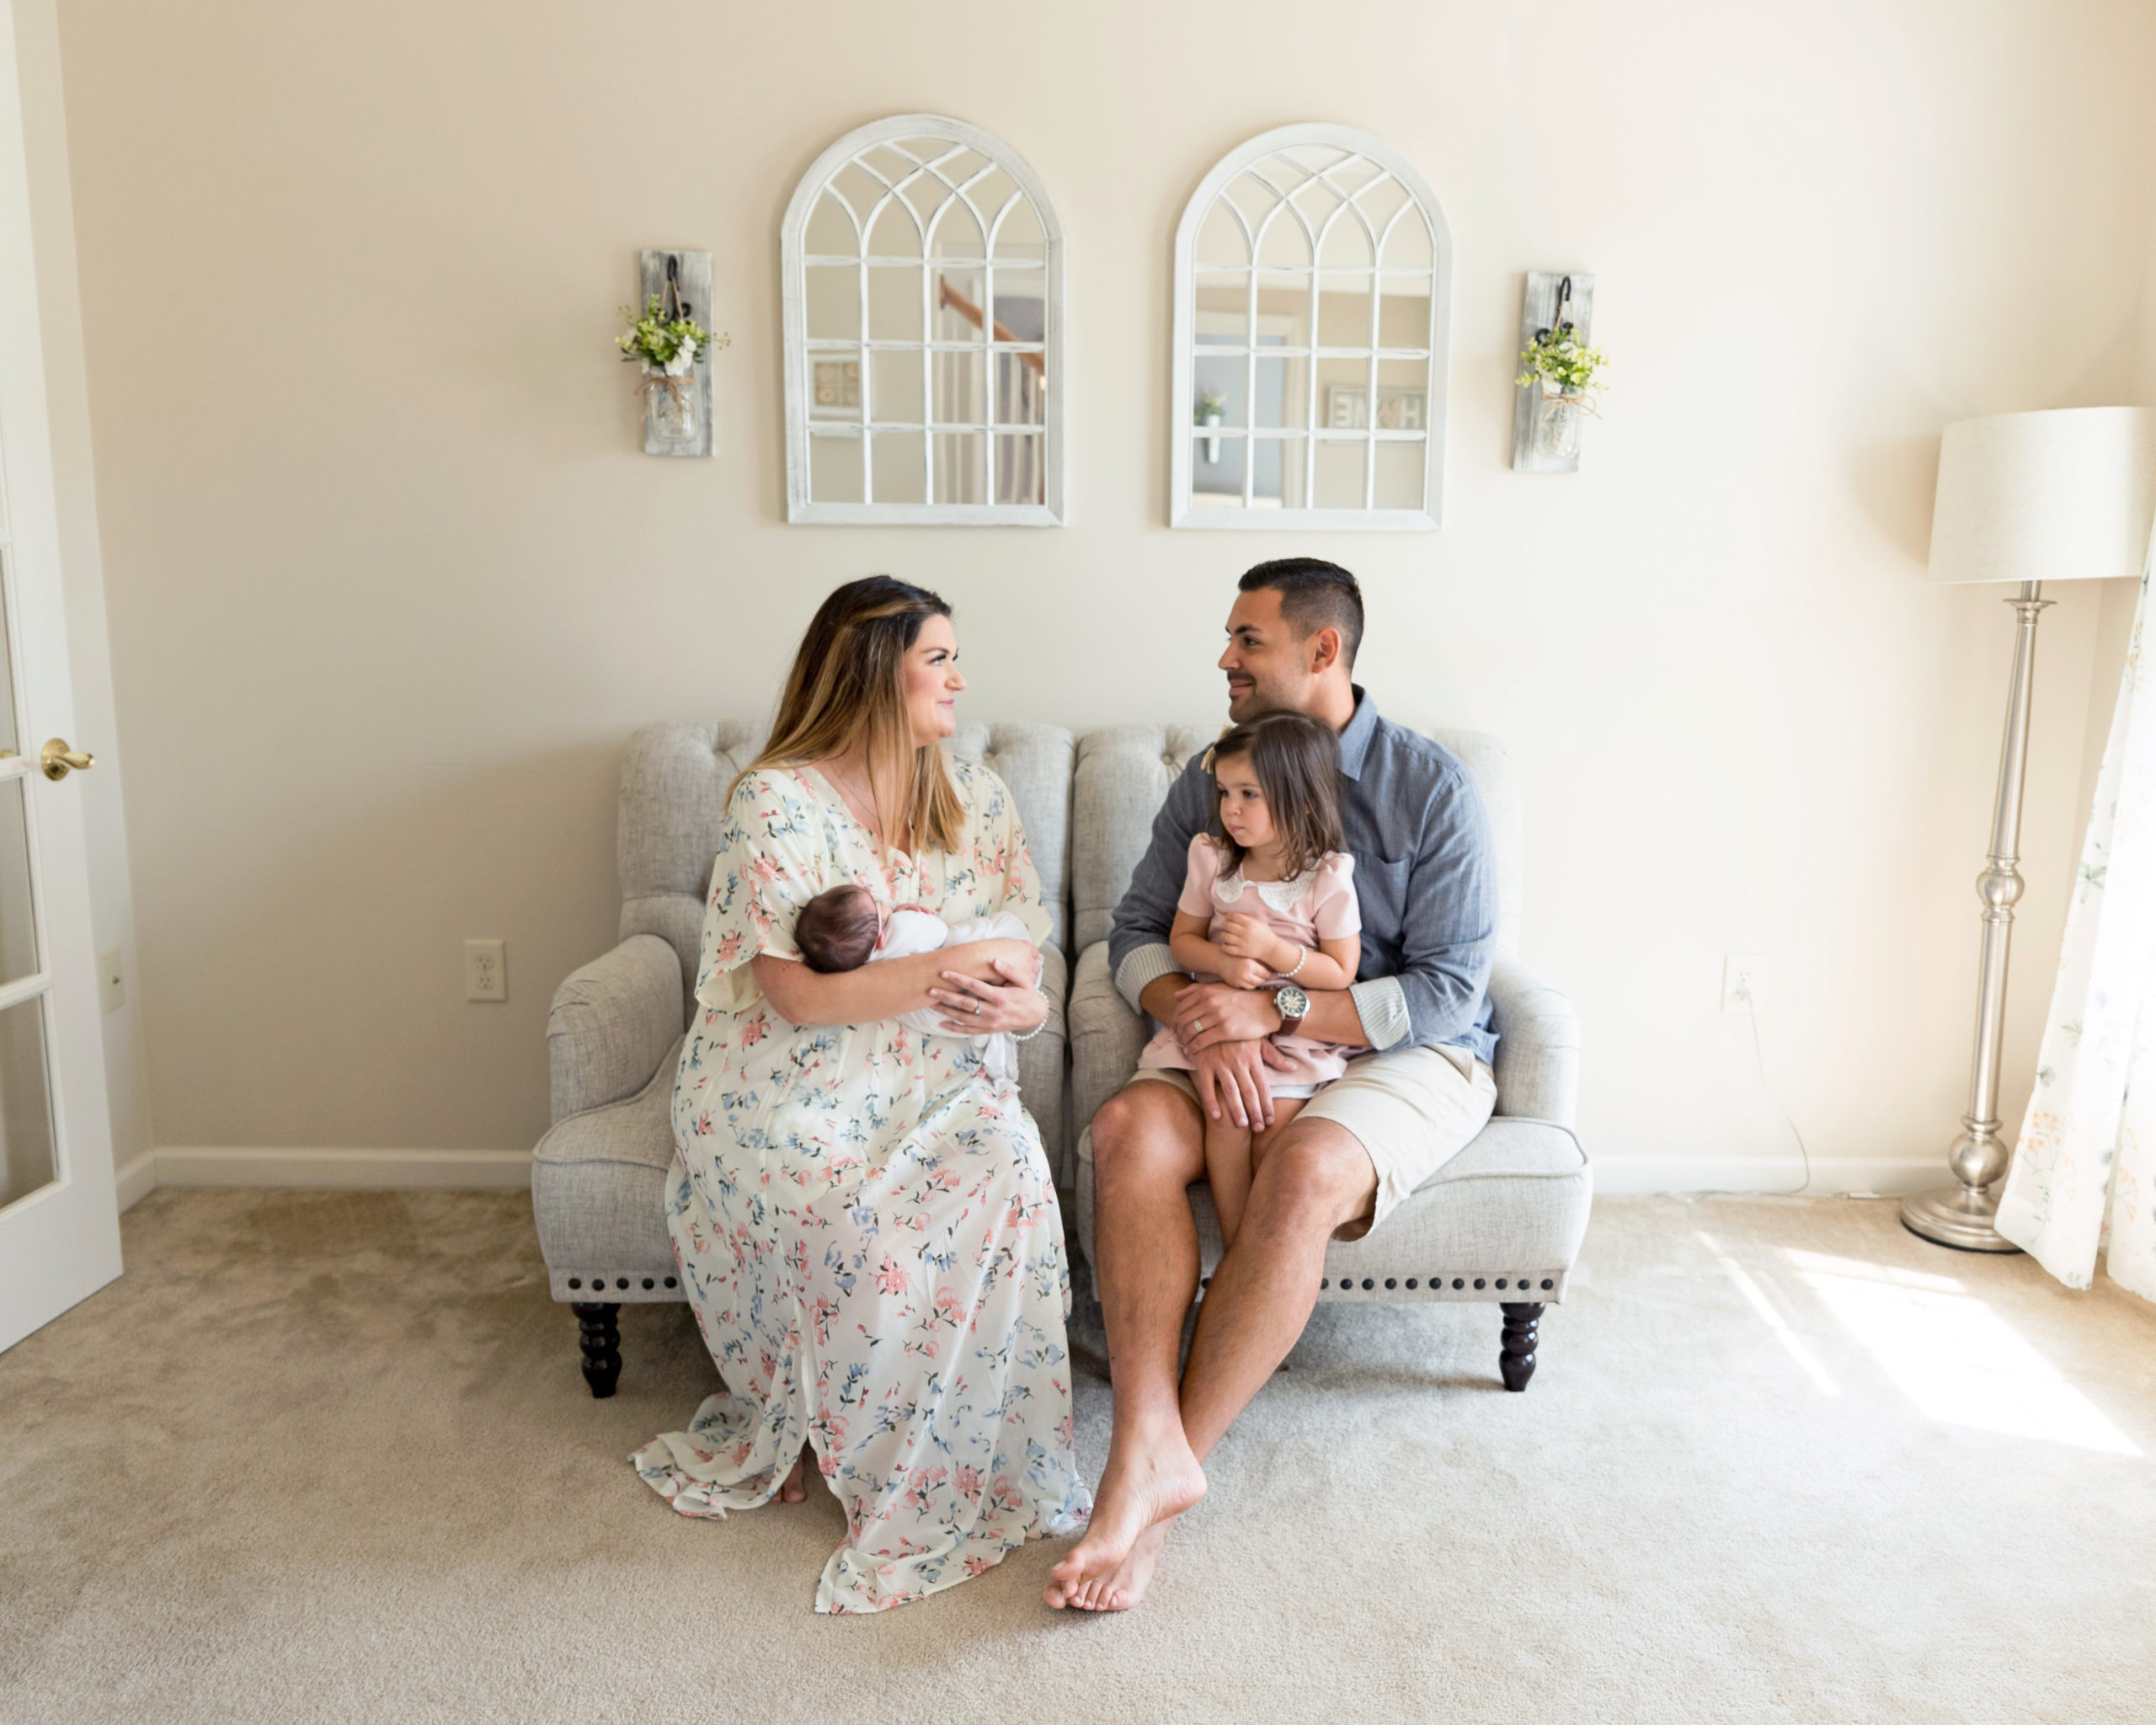 Lancaster Newborn Lifestyle Photography Session- Family sitting together with newborn baby and toddler